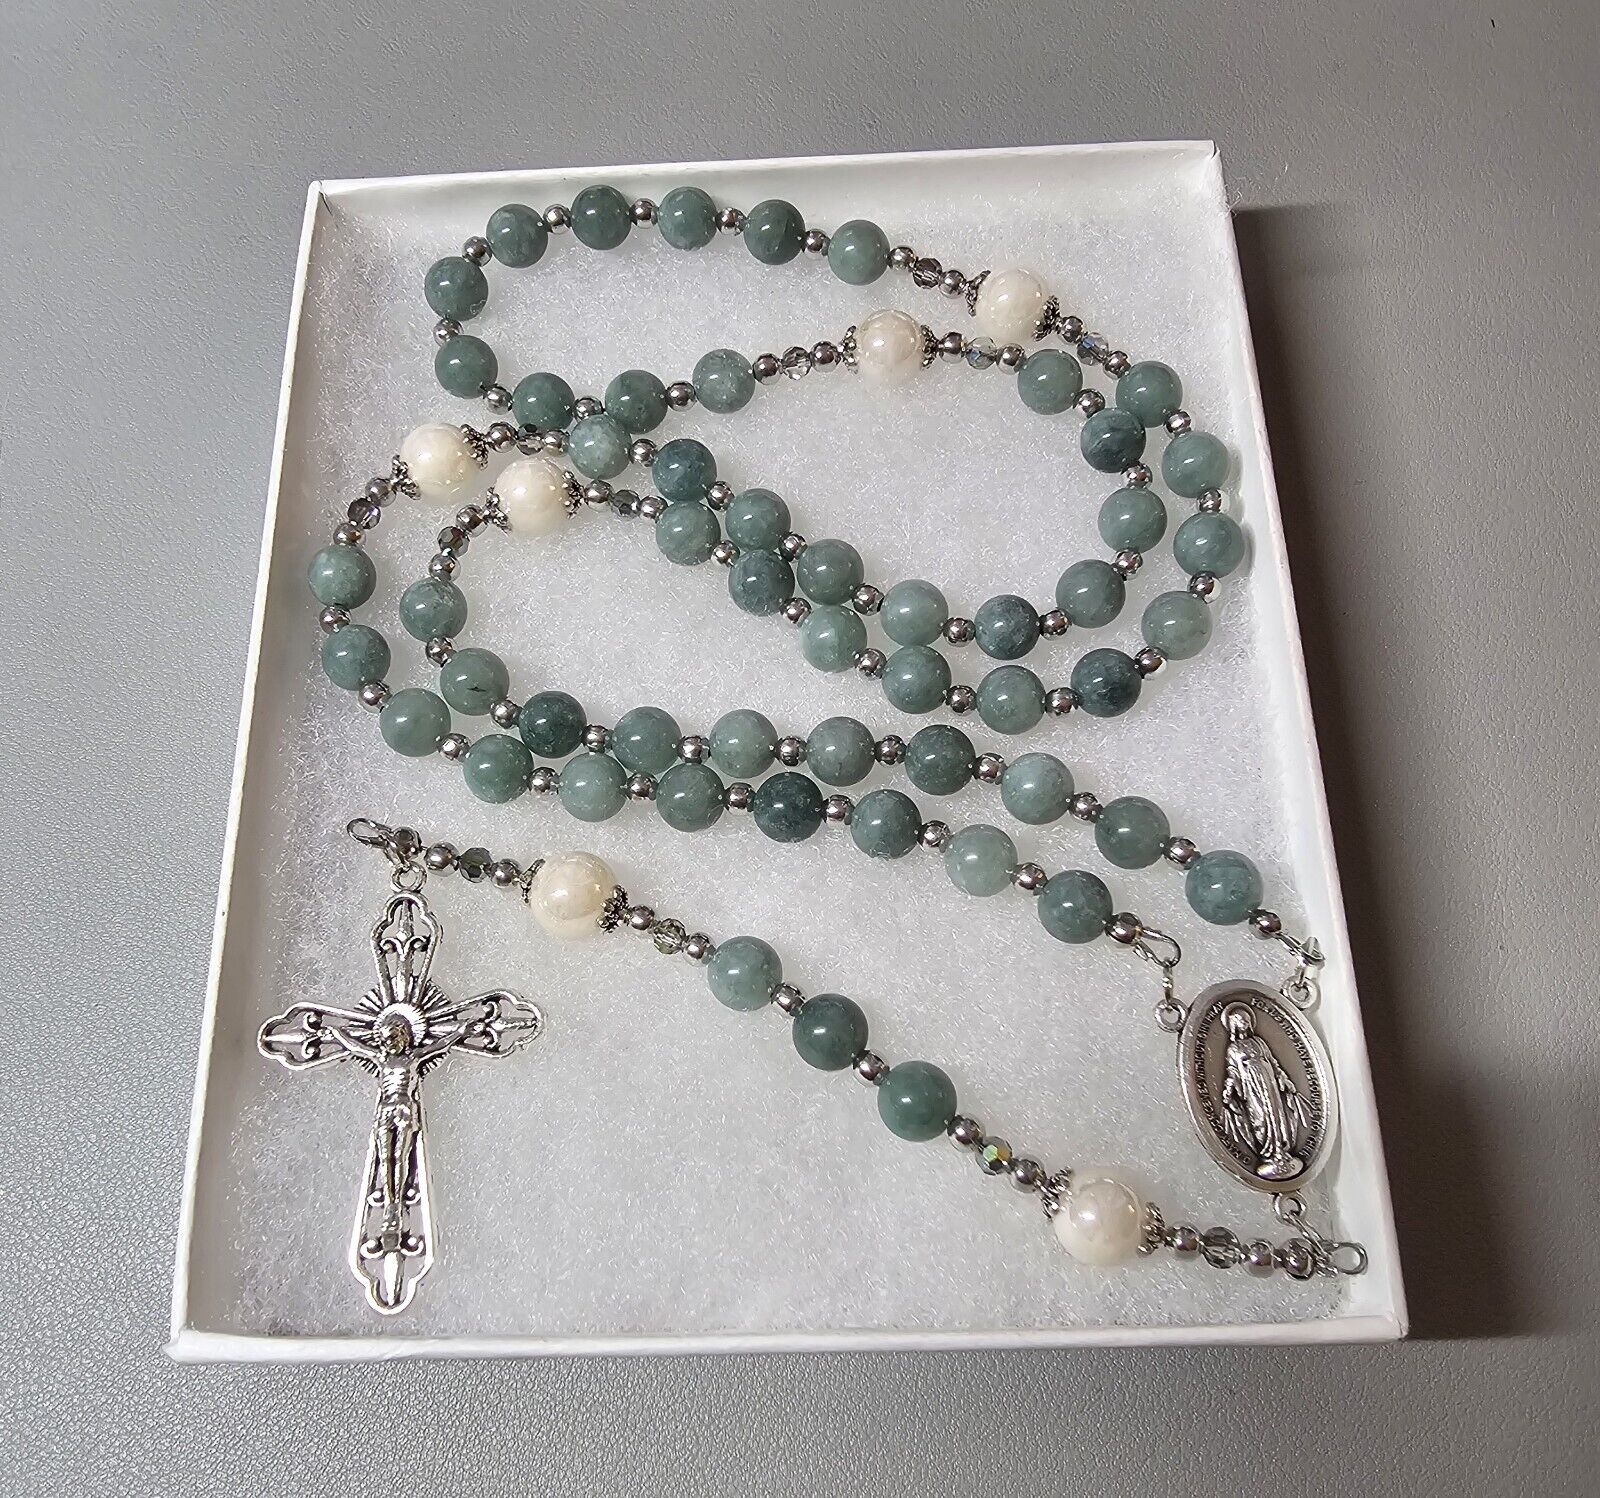 Large One Of A Kind Hand Crafted Rosary Made With Natural Burmese Jade And...